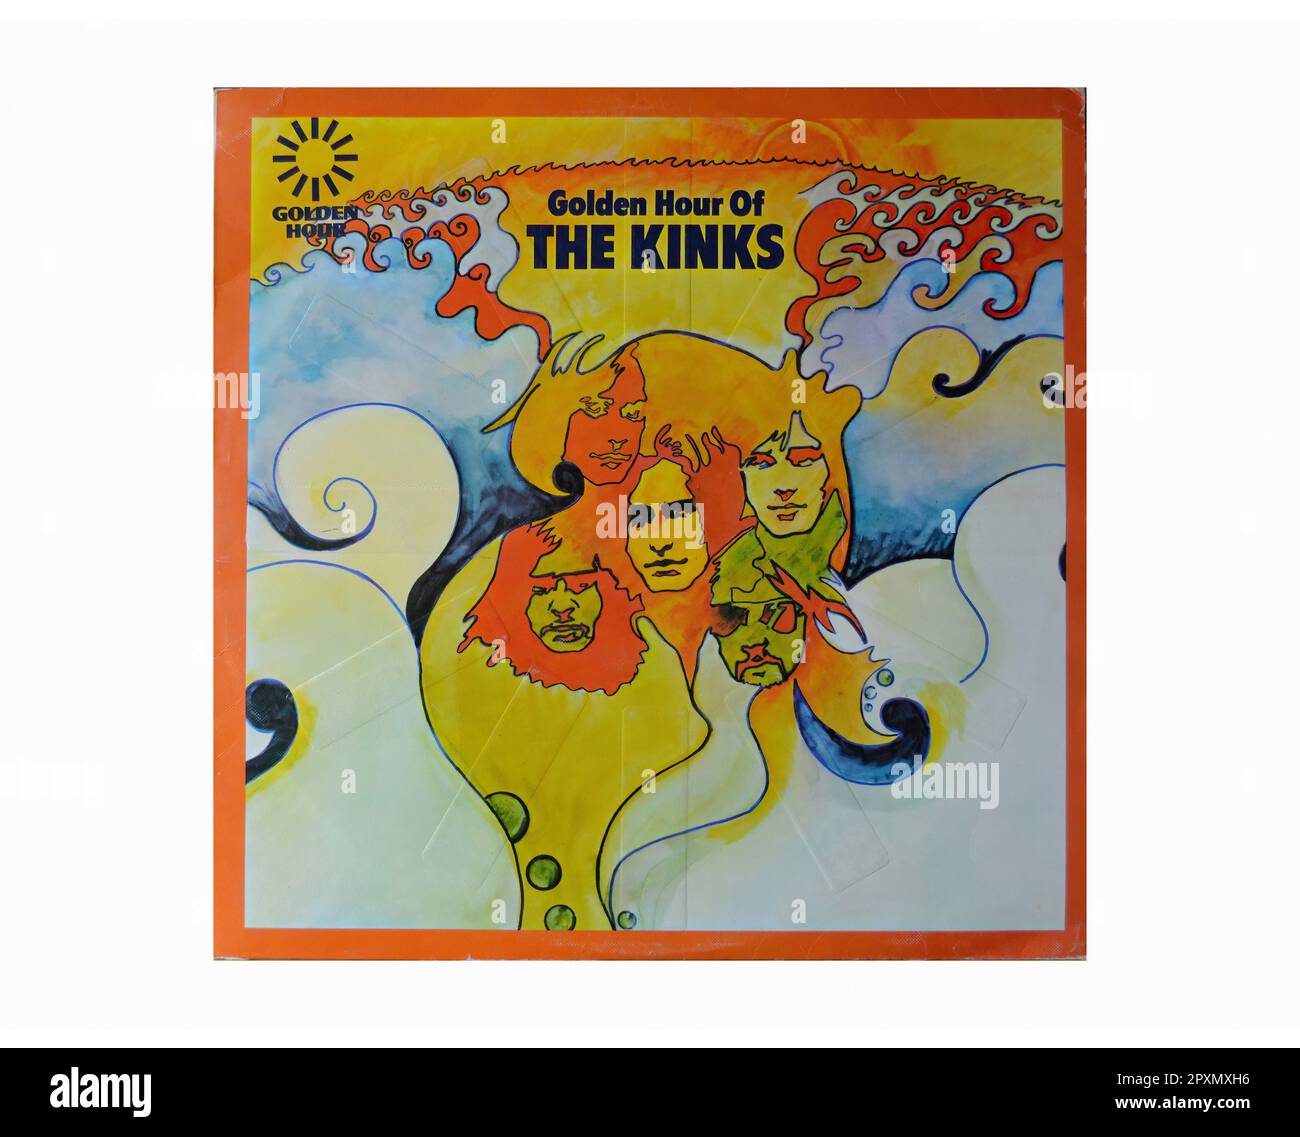 The Kinks - Golden Hour of the Kinks - Vintage L.P Music Vinyl Record Foto Stock